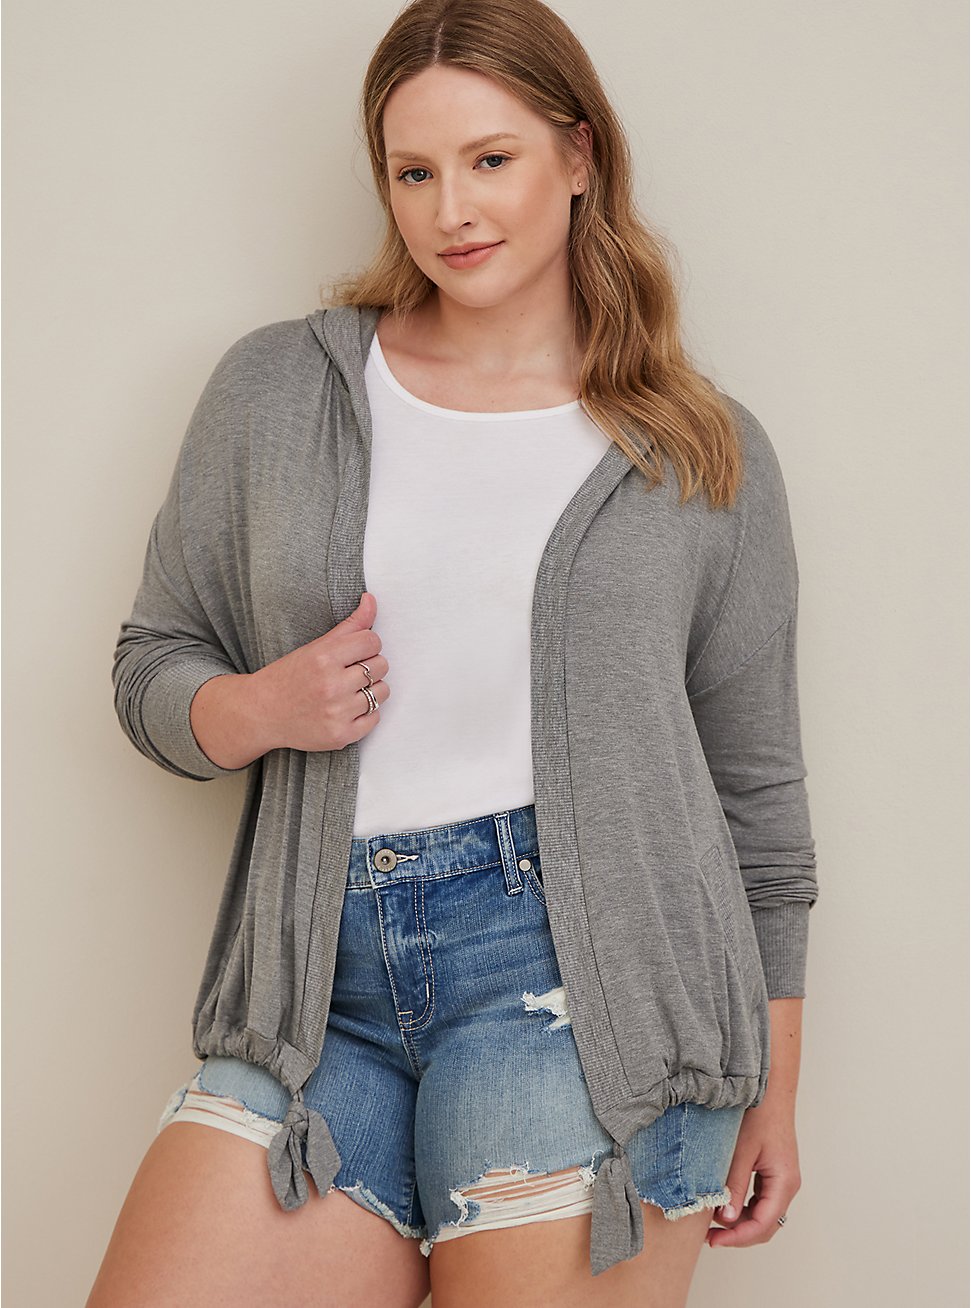 Plus Size Open Front Hooded Cardigan - Super Soft Grey, GREY, hi-res